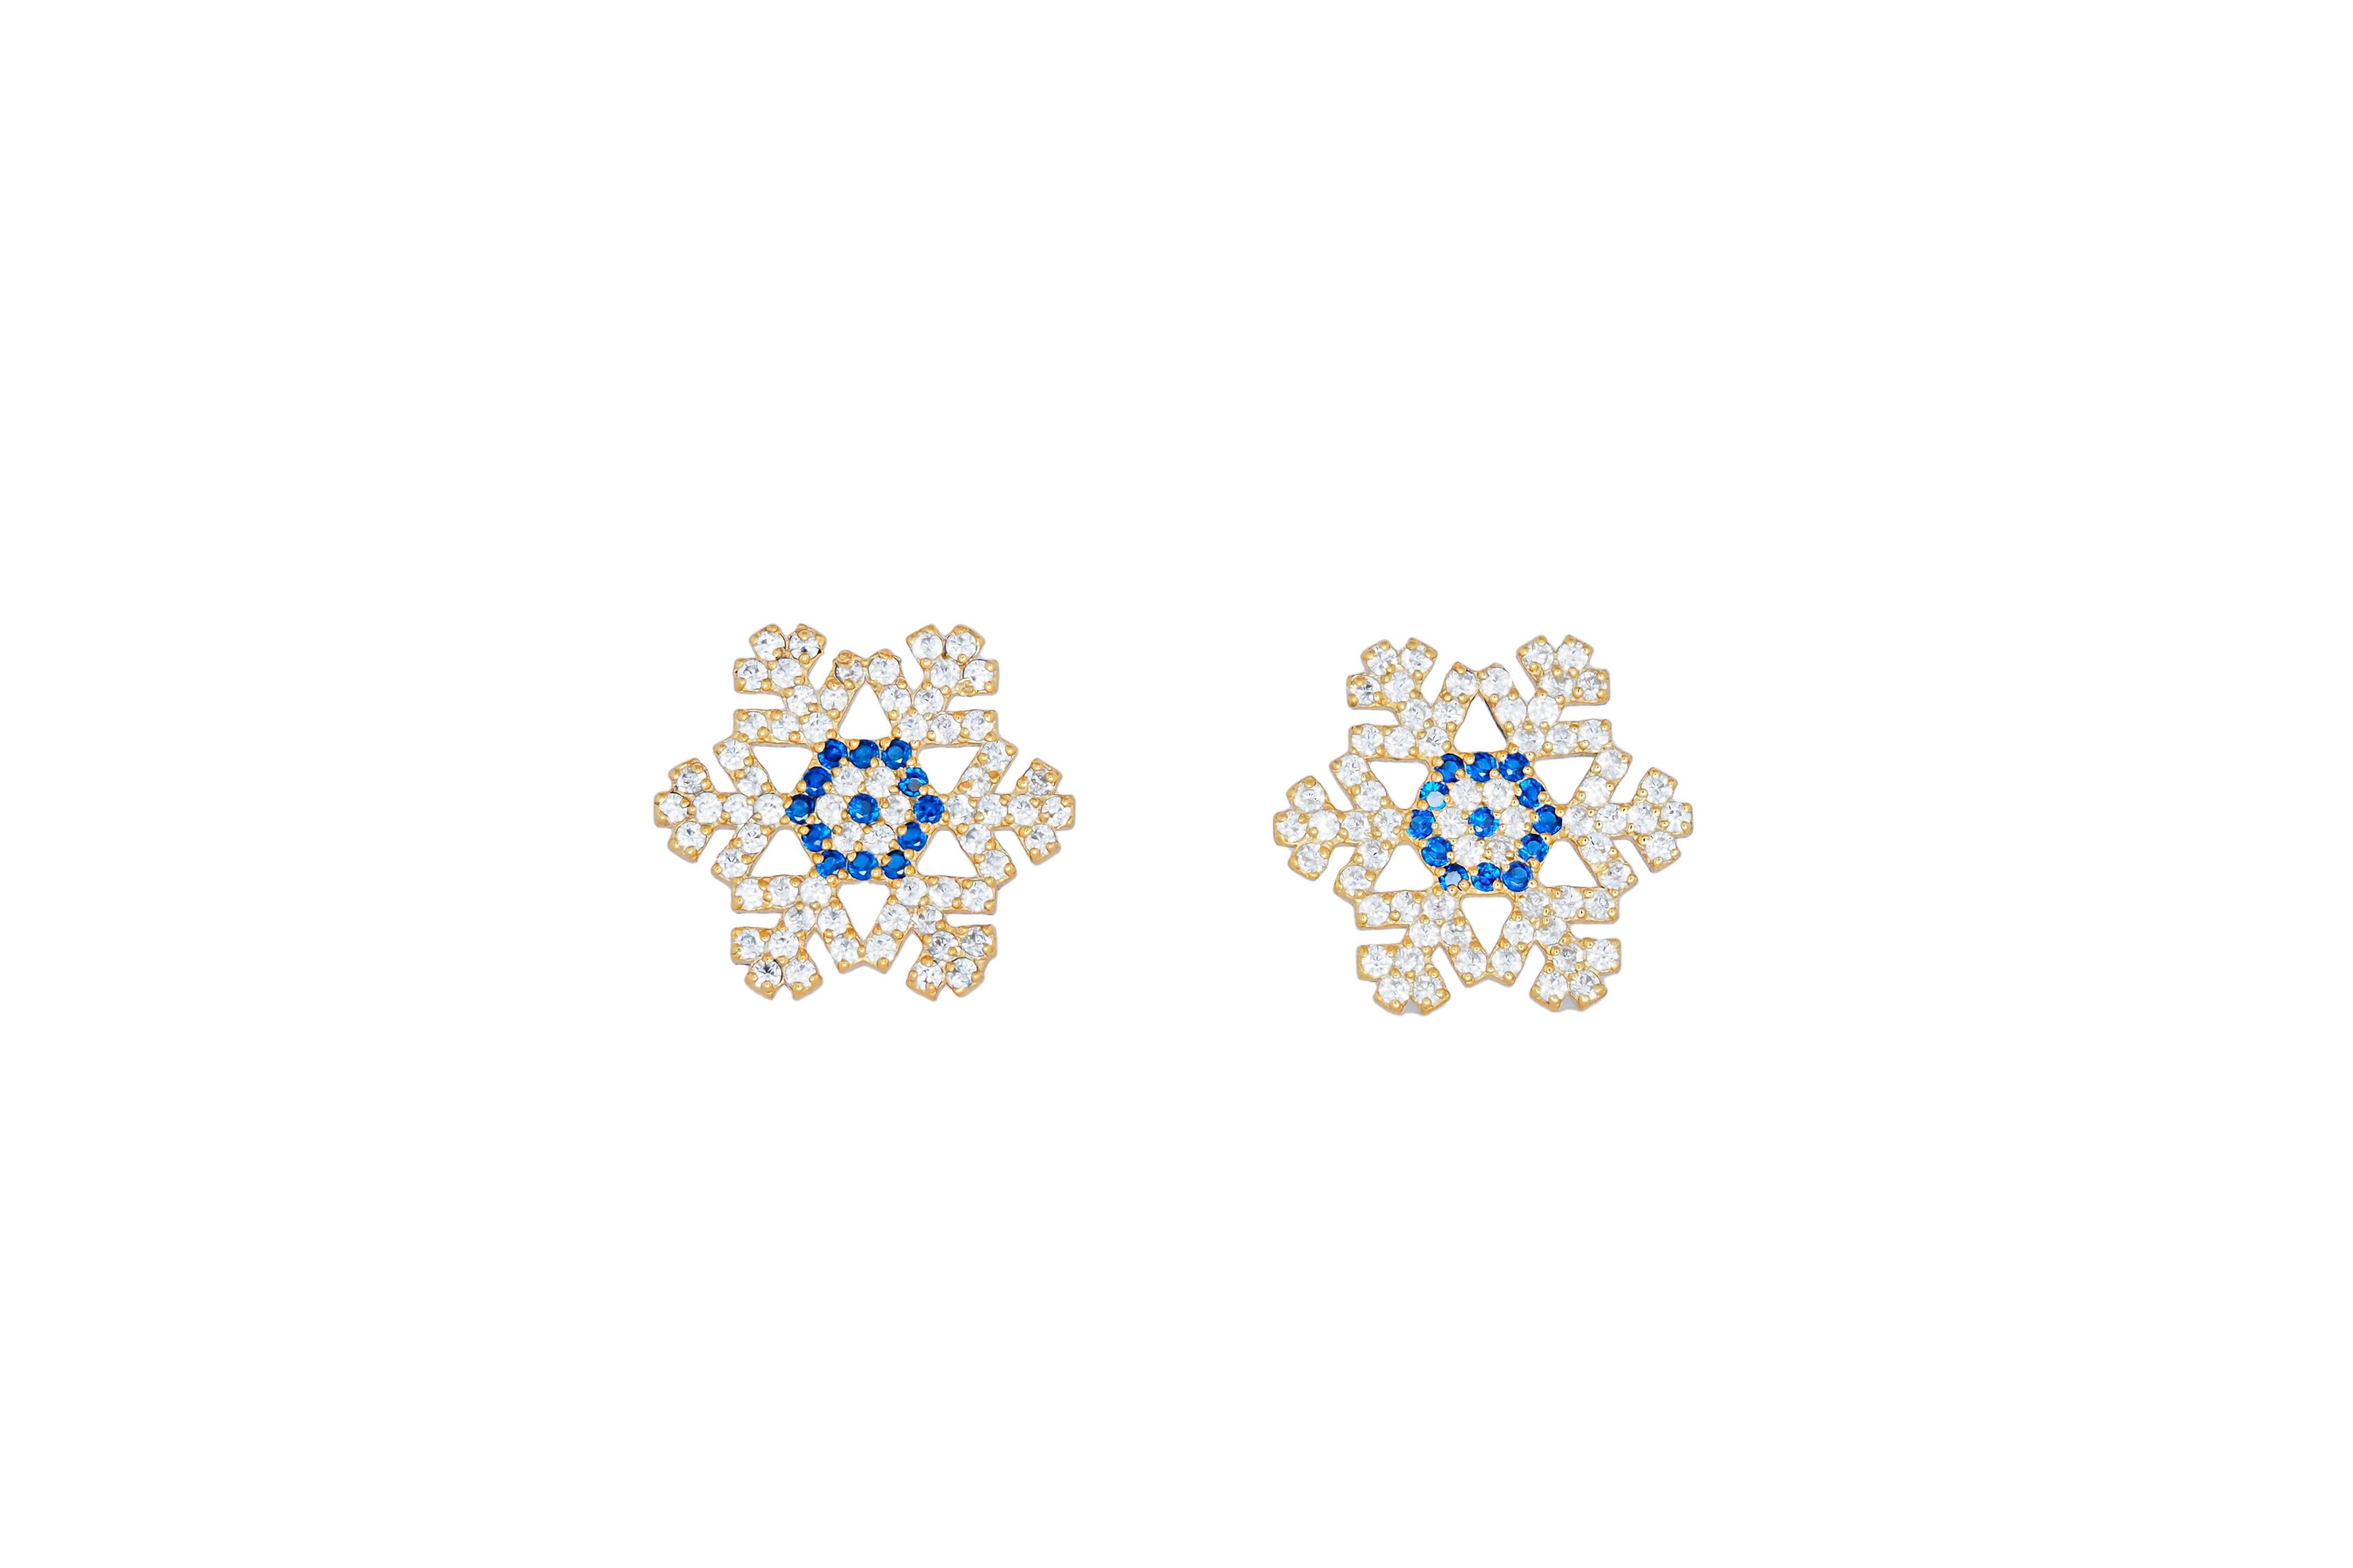 Snowflake 14k gold studs. 
Snow gold Earrings. Christmas Earrings Jewelry. Christmas Present for her. Sparkly gold Earrings. Christmas Tree gold studs. Santa Earrings.

Total weight: 2.2 g.
Metal: 14k solid gold
Gemstones: multicolor sapphires and